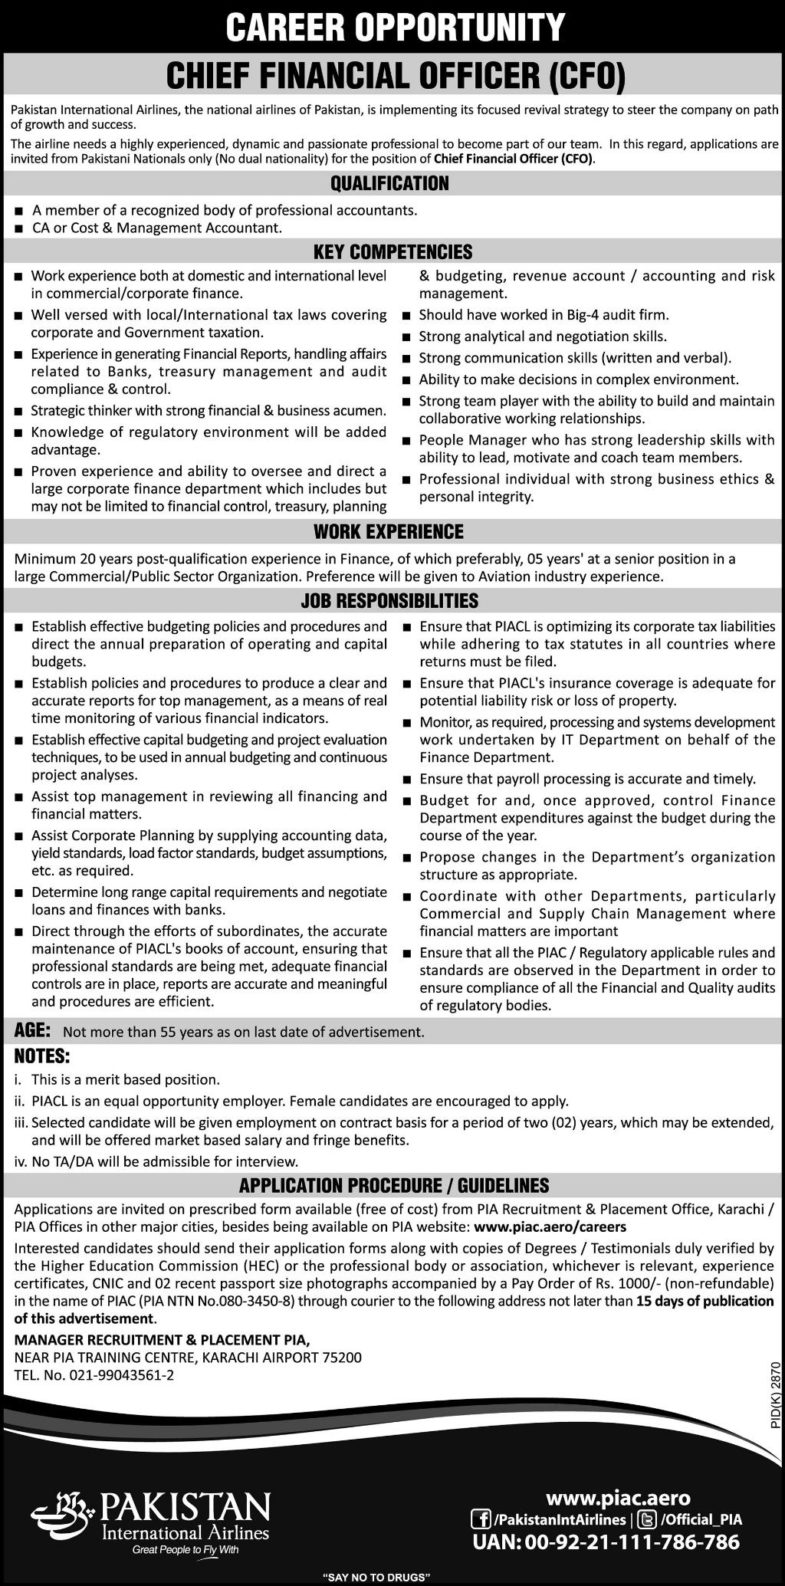 PIA Jobs 2019 for Chief Financial Officer / CFO